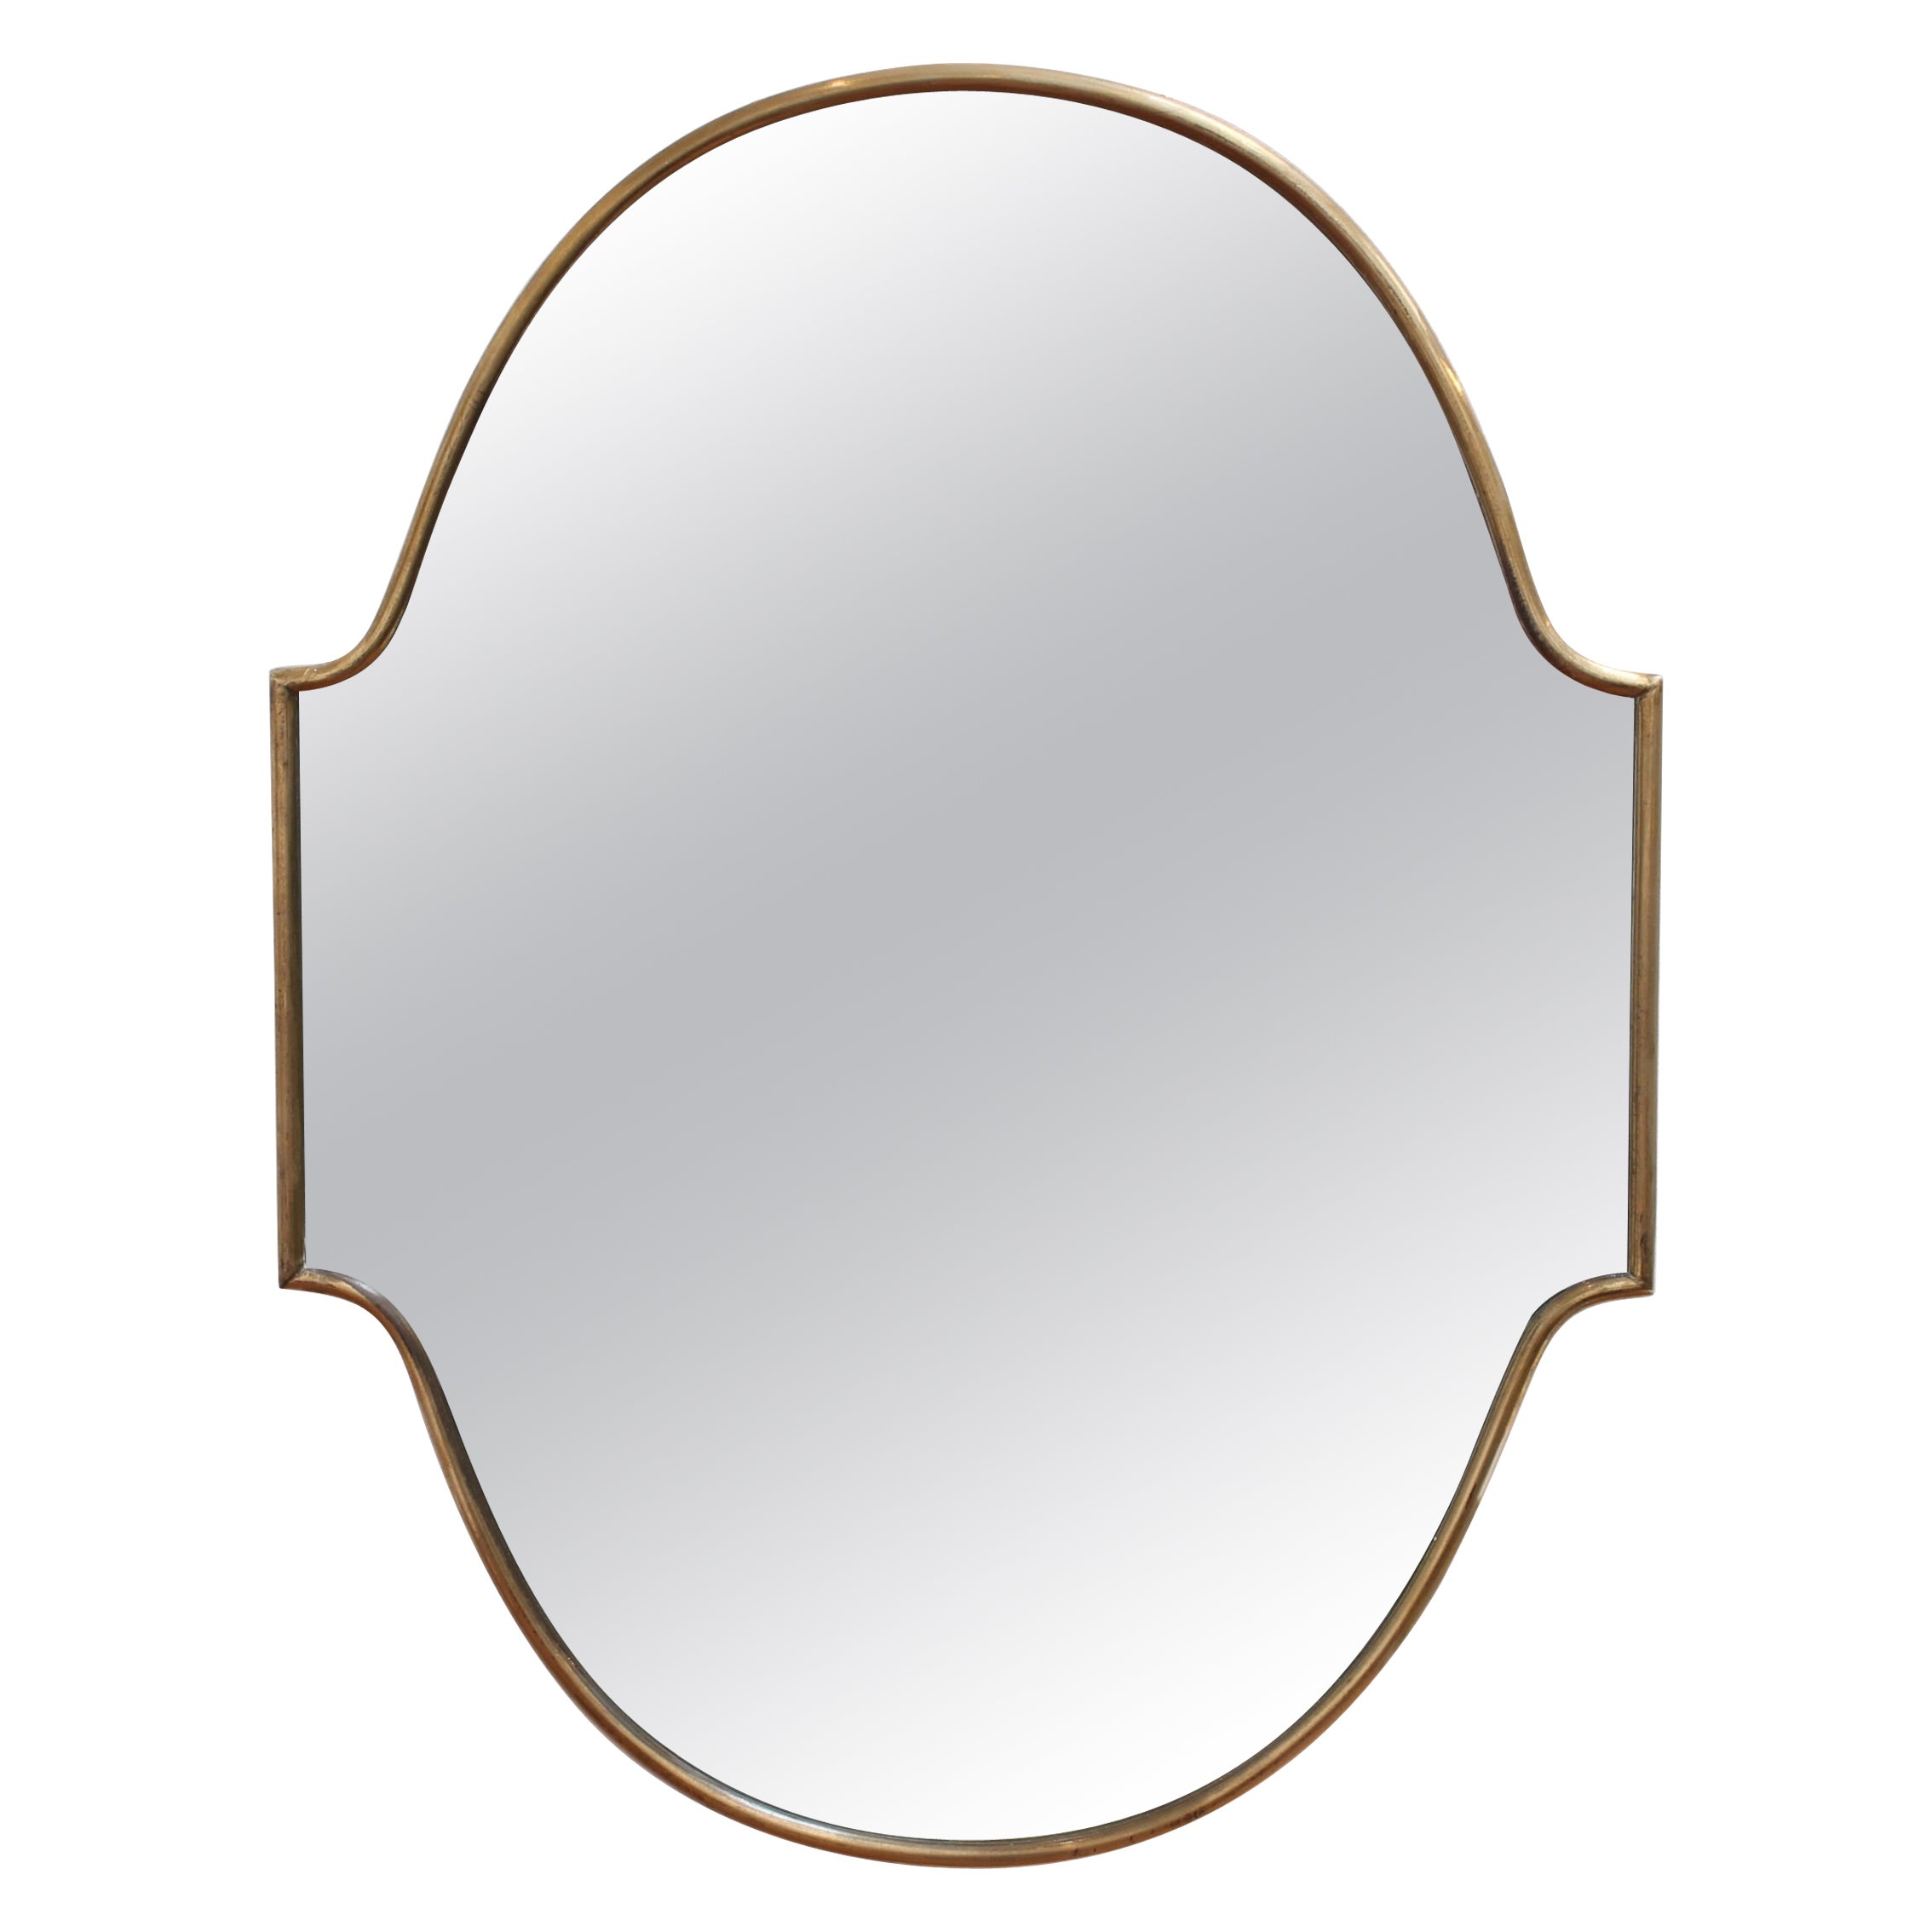 Vintage Italian Wall Mirror with Brass Frame (circa 1950s) - Small For Sale